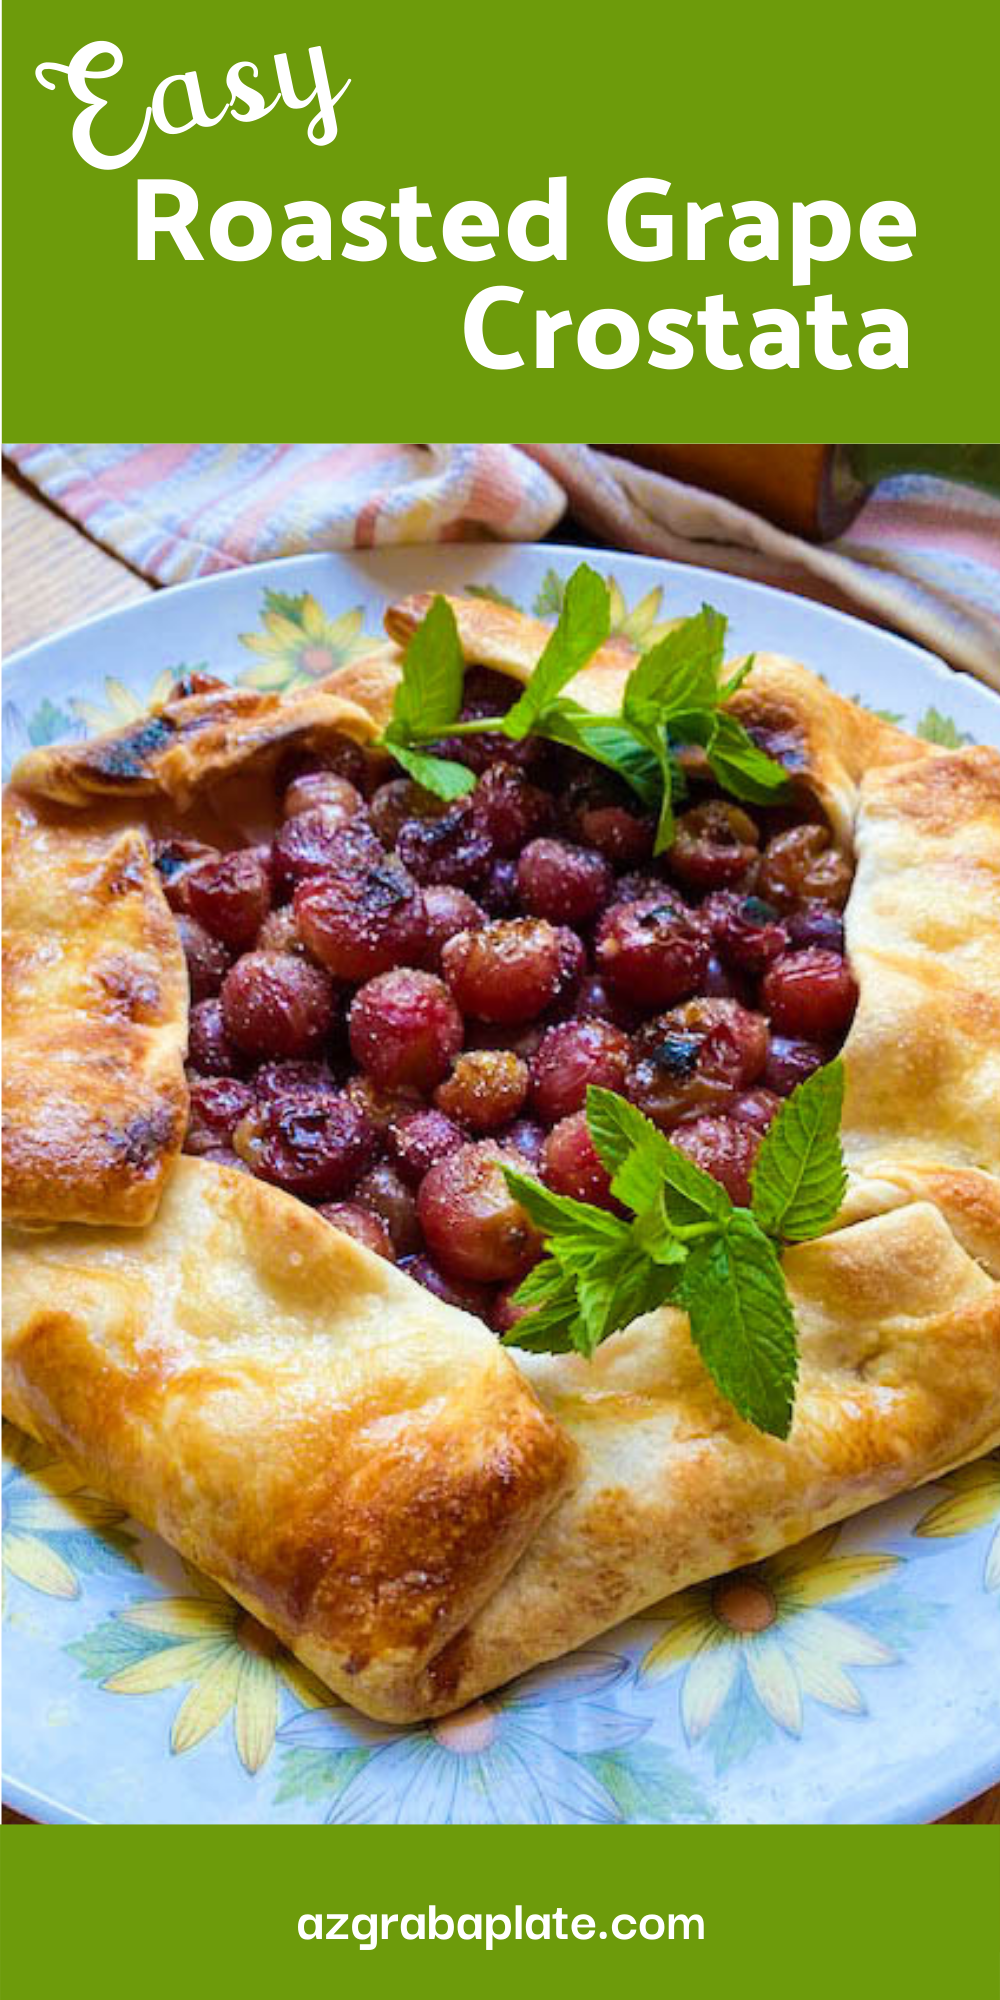 Easy Roasted Grape Crostata has a flaky crust and fresh fruit for a divine treat!